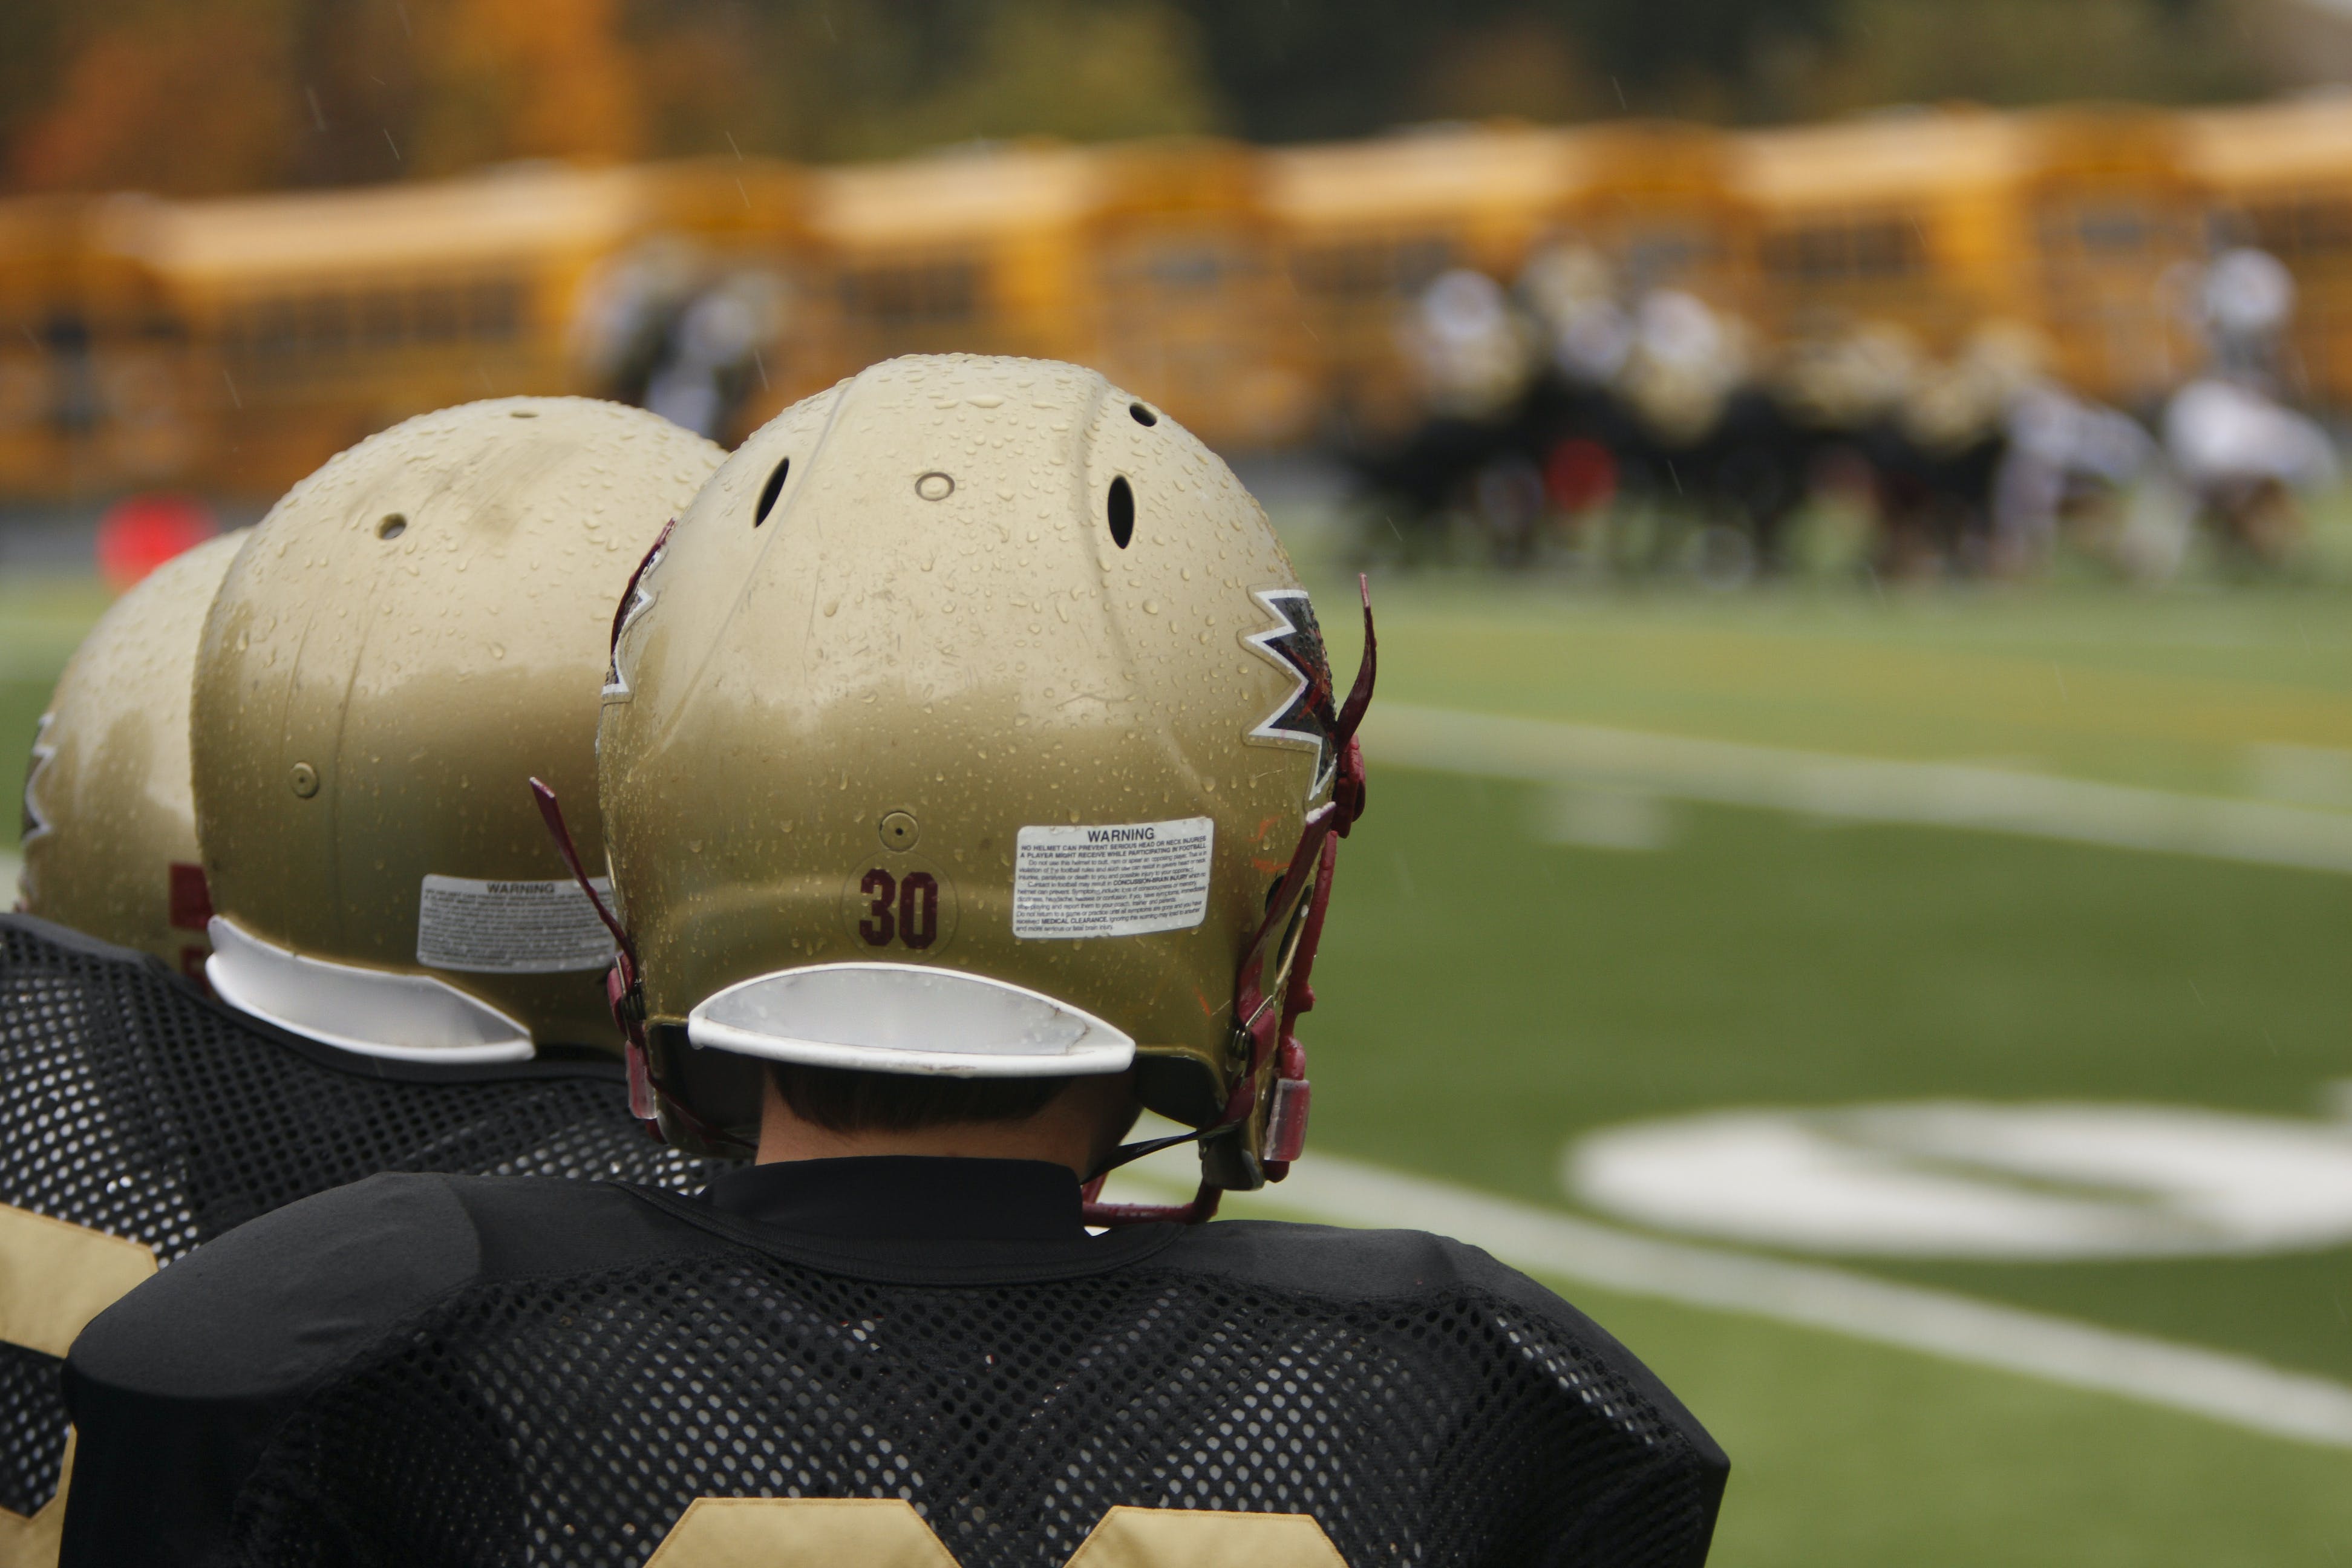 Can Dietary Supplements Really Prevent and Treat Concussions?